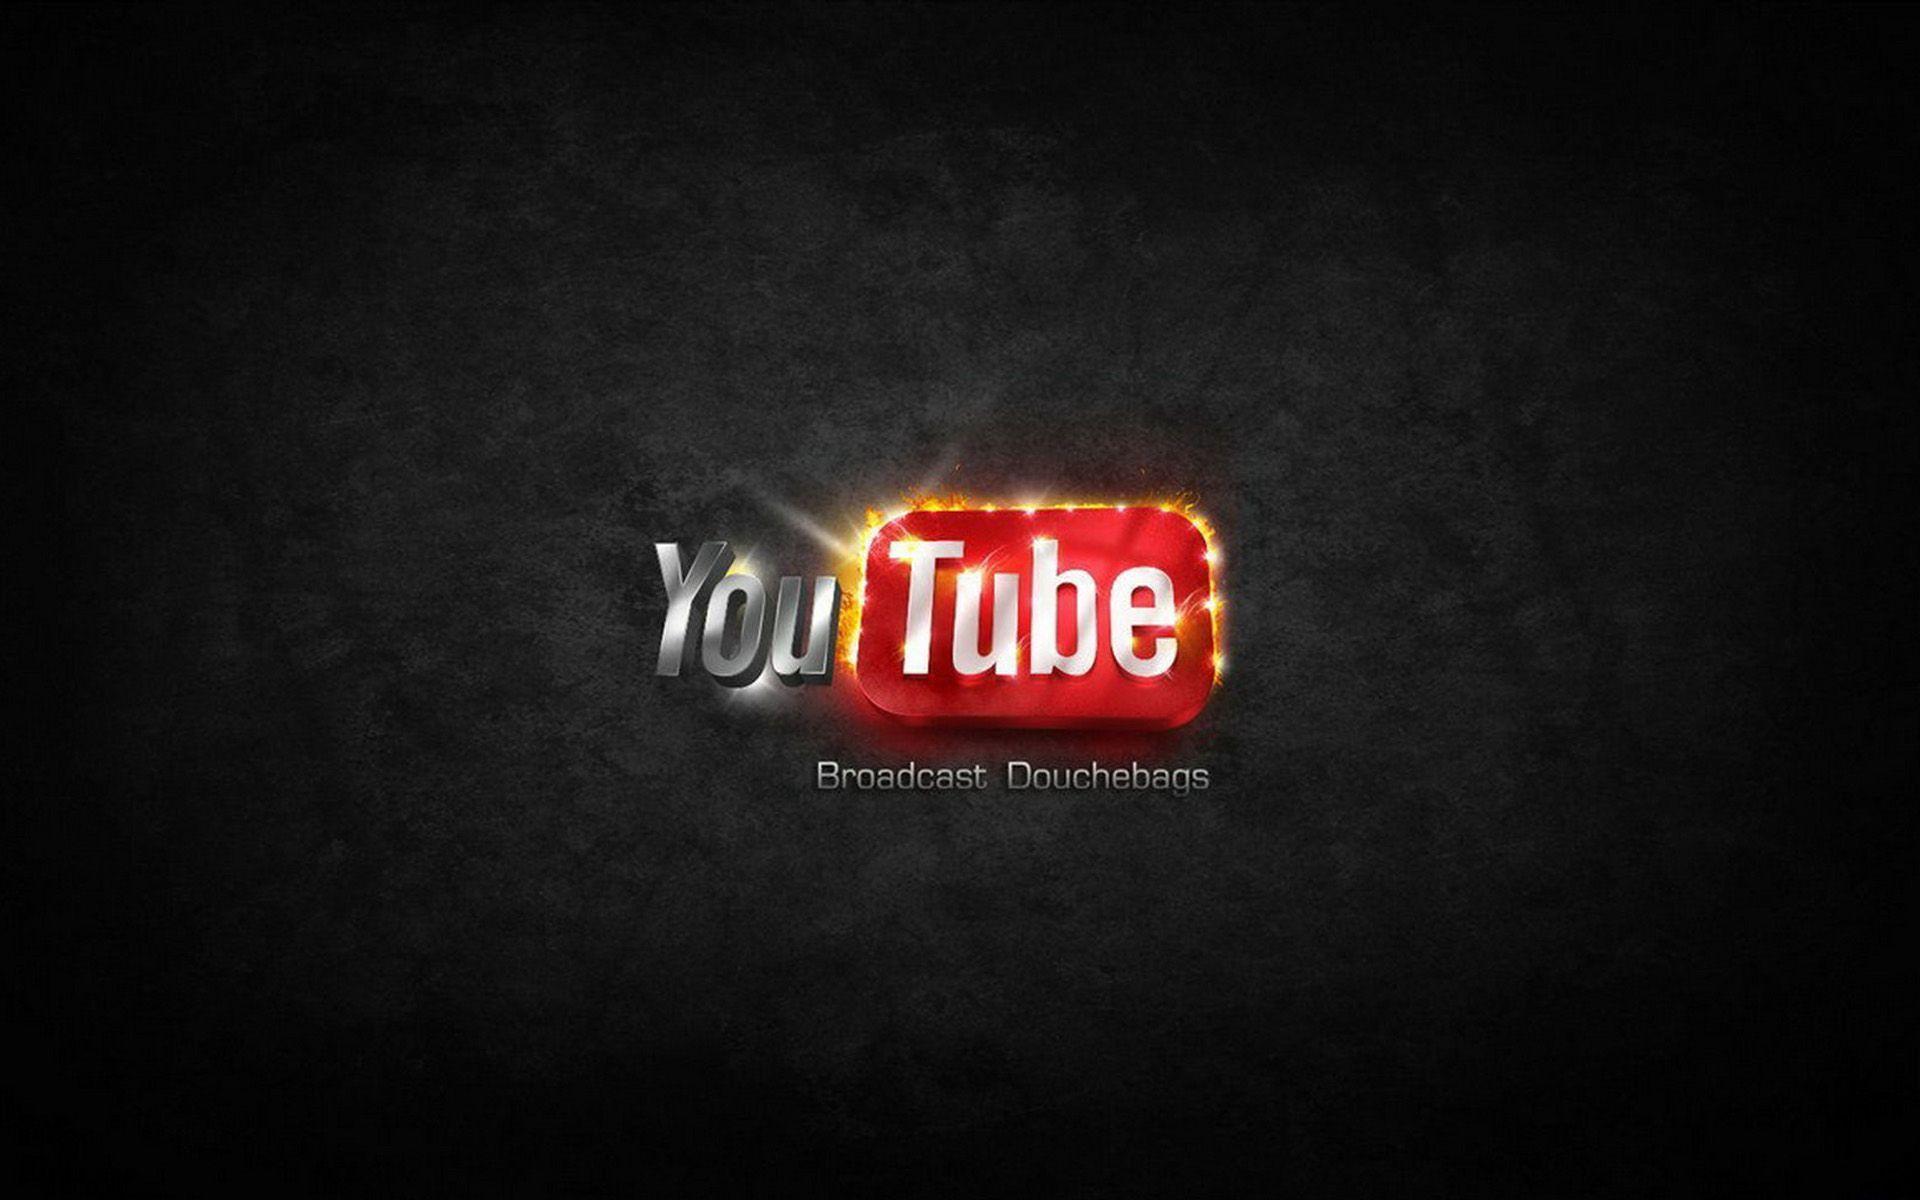 YouTube Wallpapers - Wallpaper Cave